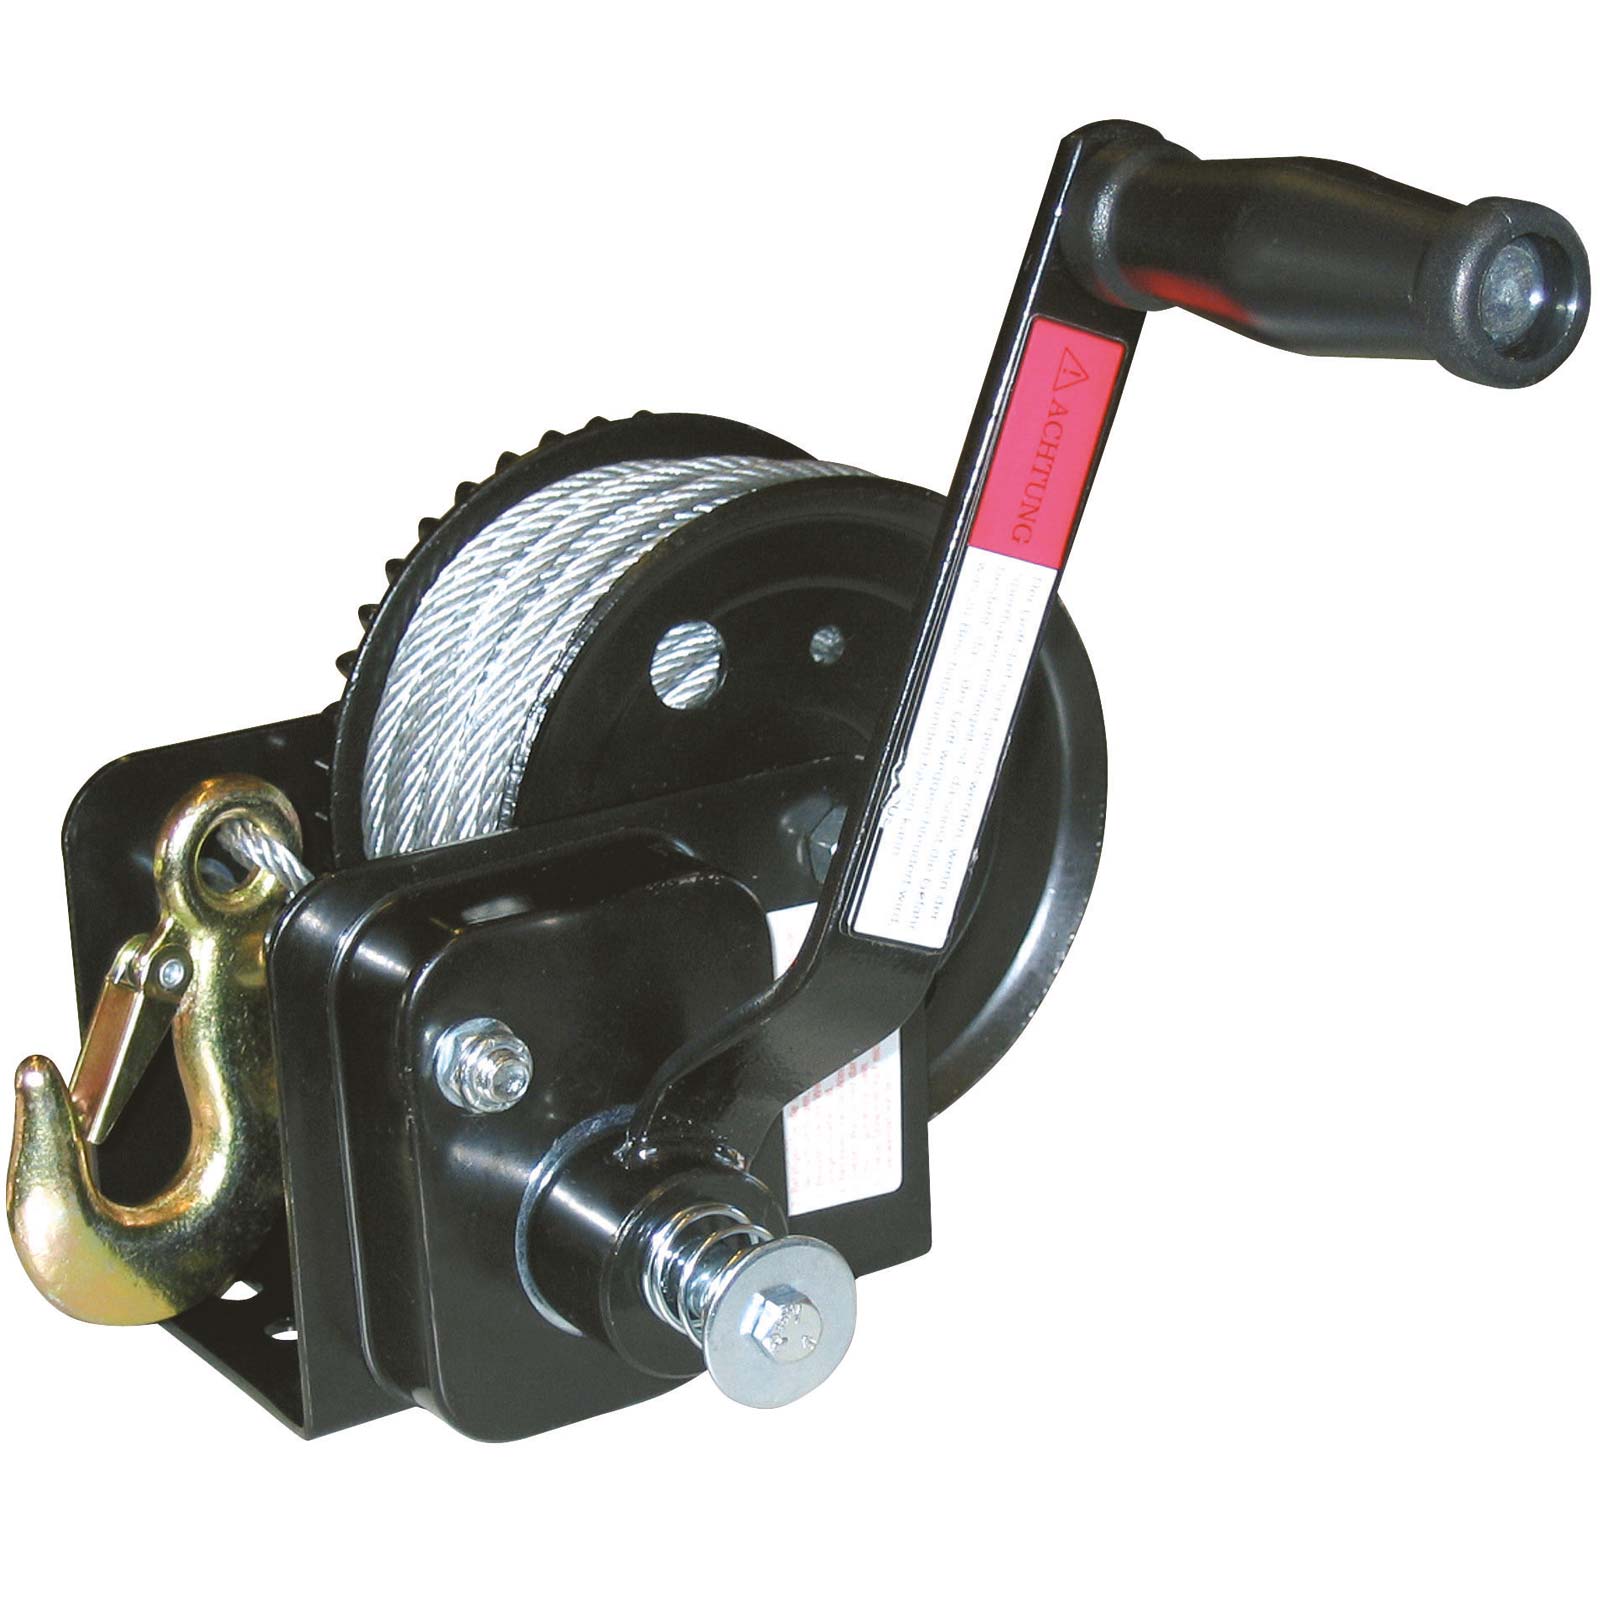 Rope Winch Hand Winch automatic brake 20 m rope